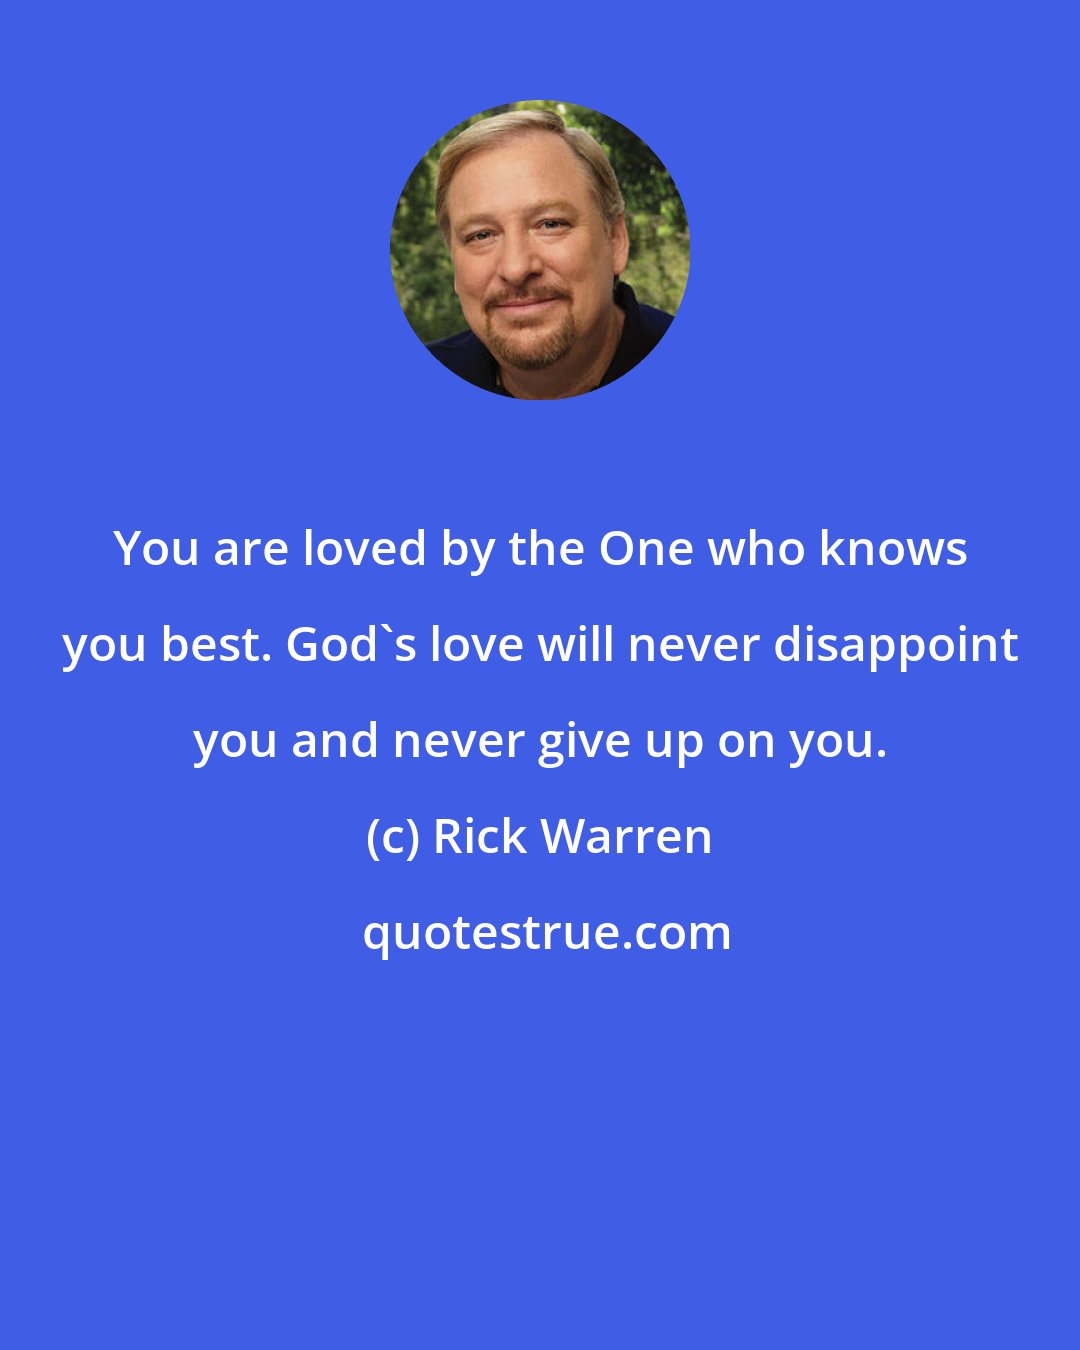 Rick Warren: You are loved by the One who knows you best. God's love will never disappoint you and never give up on you.